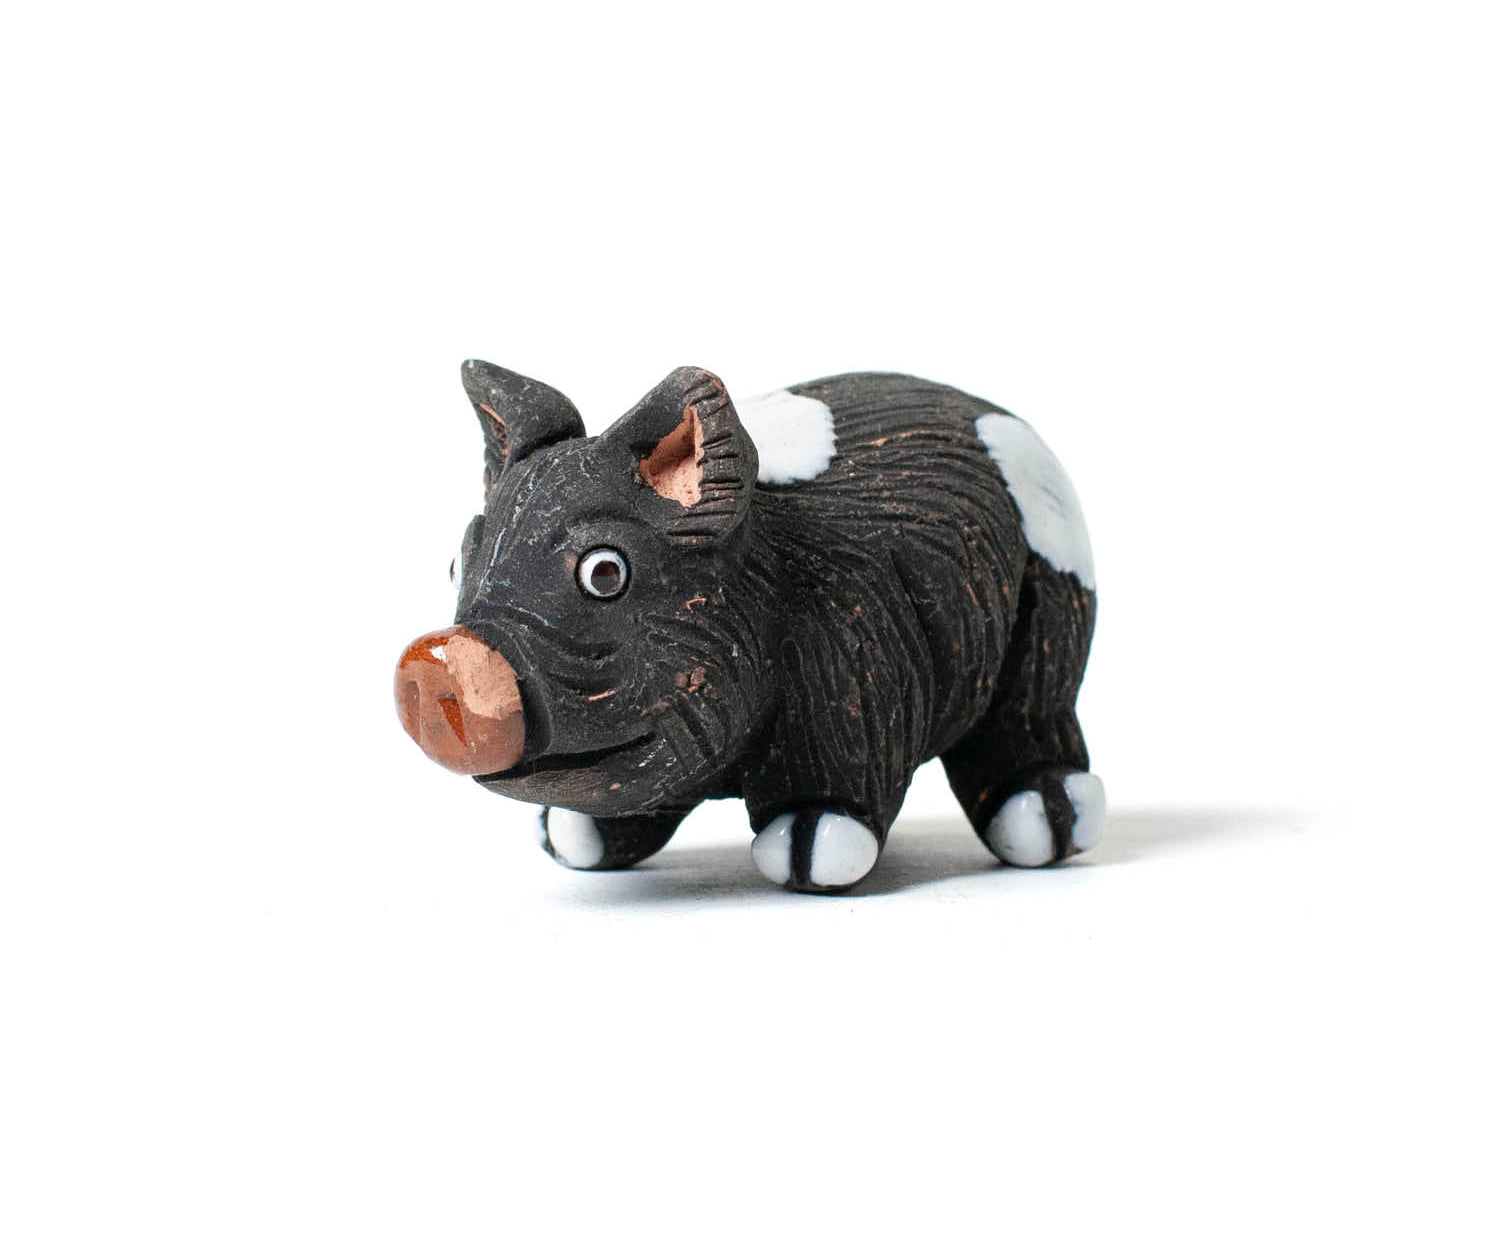 Vintage Object : LEPS Peruvian Pig | LIKE THIS SHOP